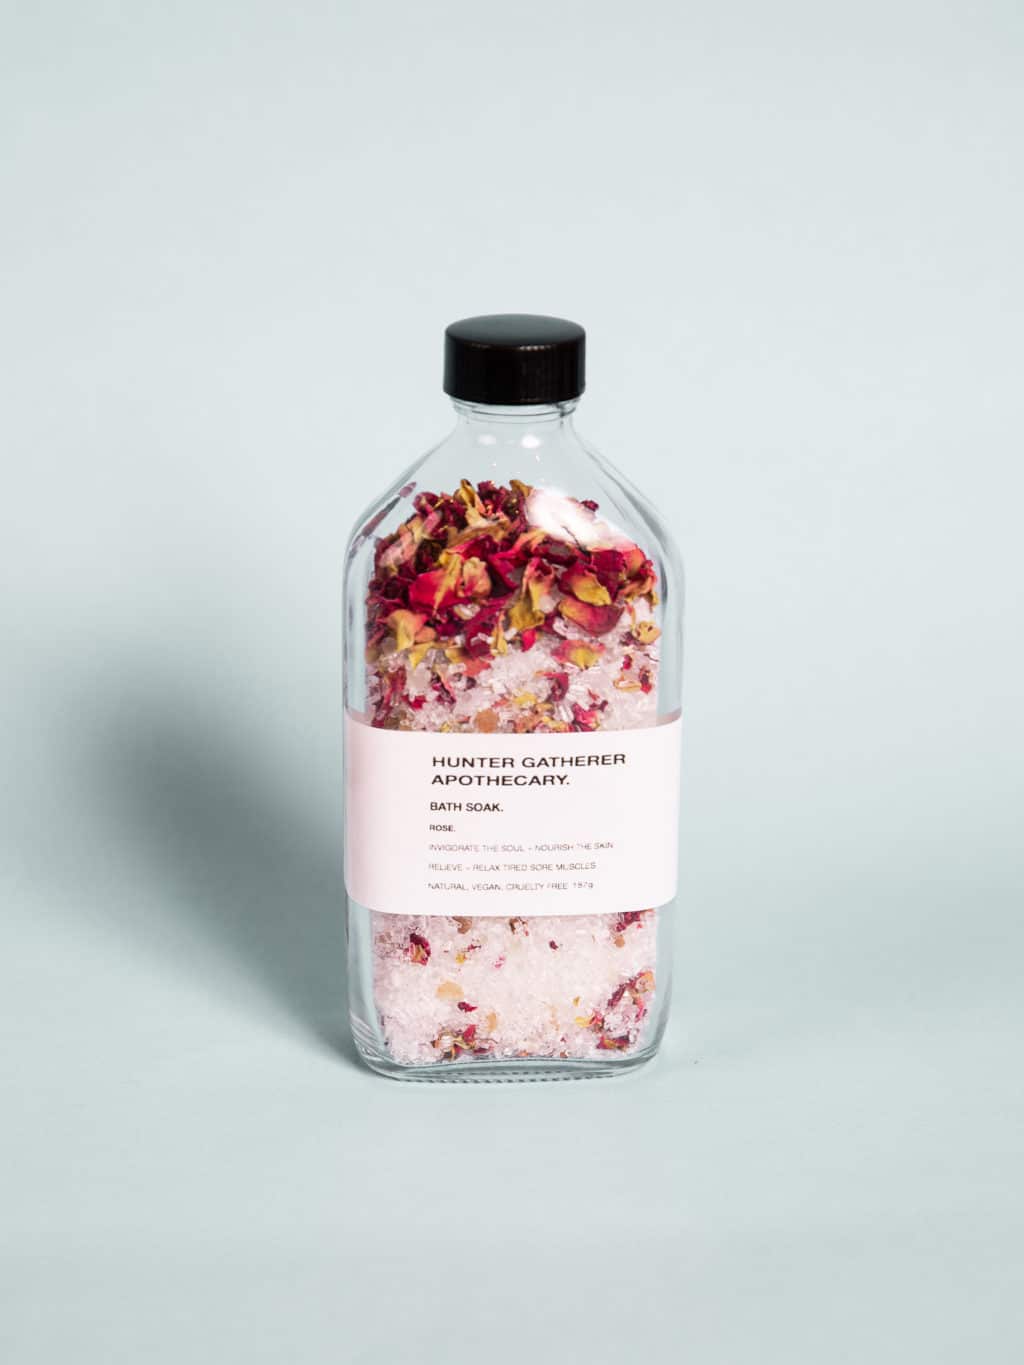 Rose scented bath soak ina glass bottle. A beautiful gift at our boutique, Wagga Wagga florist shop.